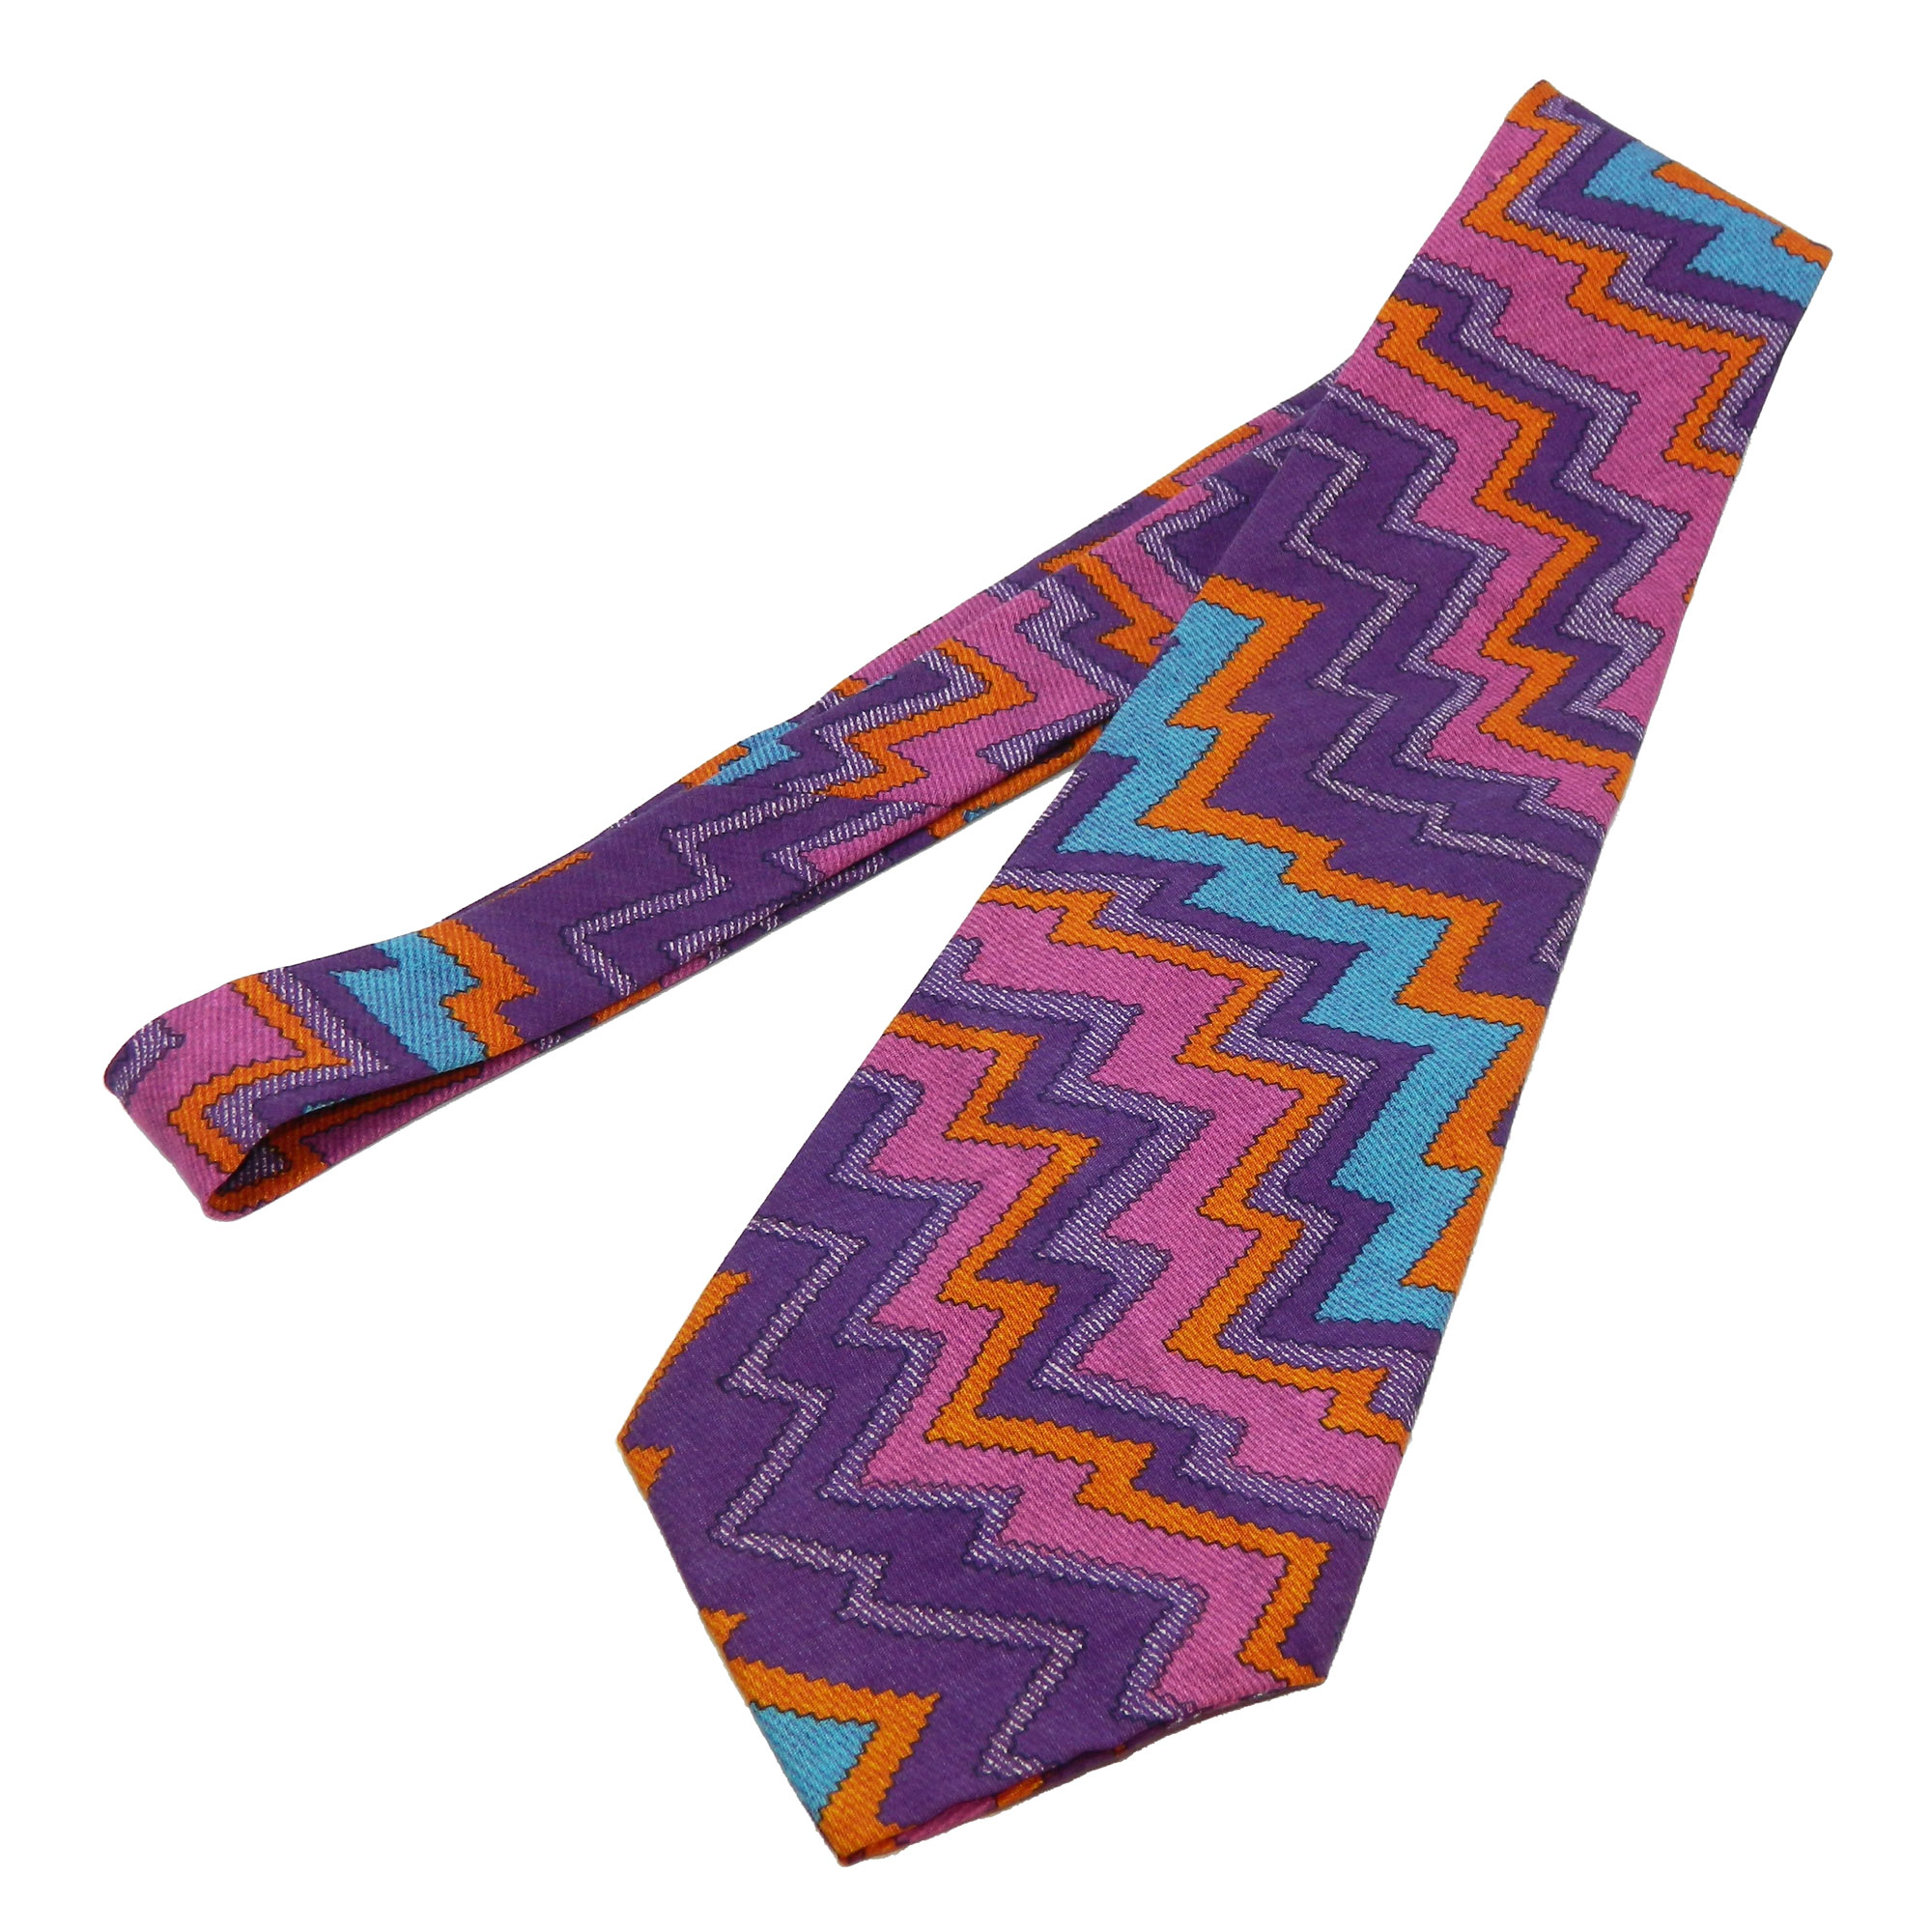 Colorful Mod style tie